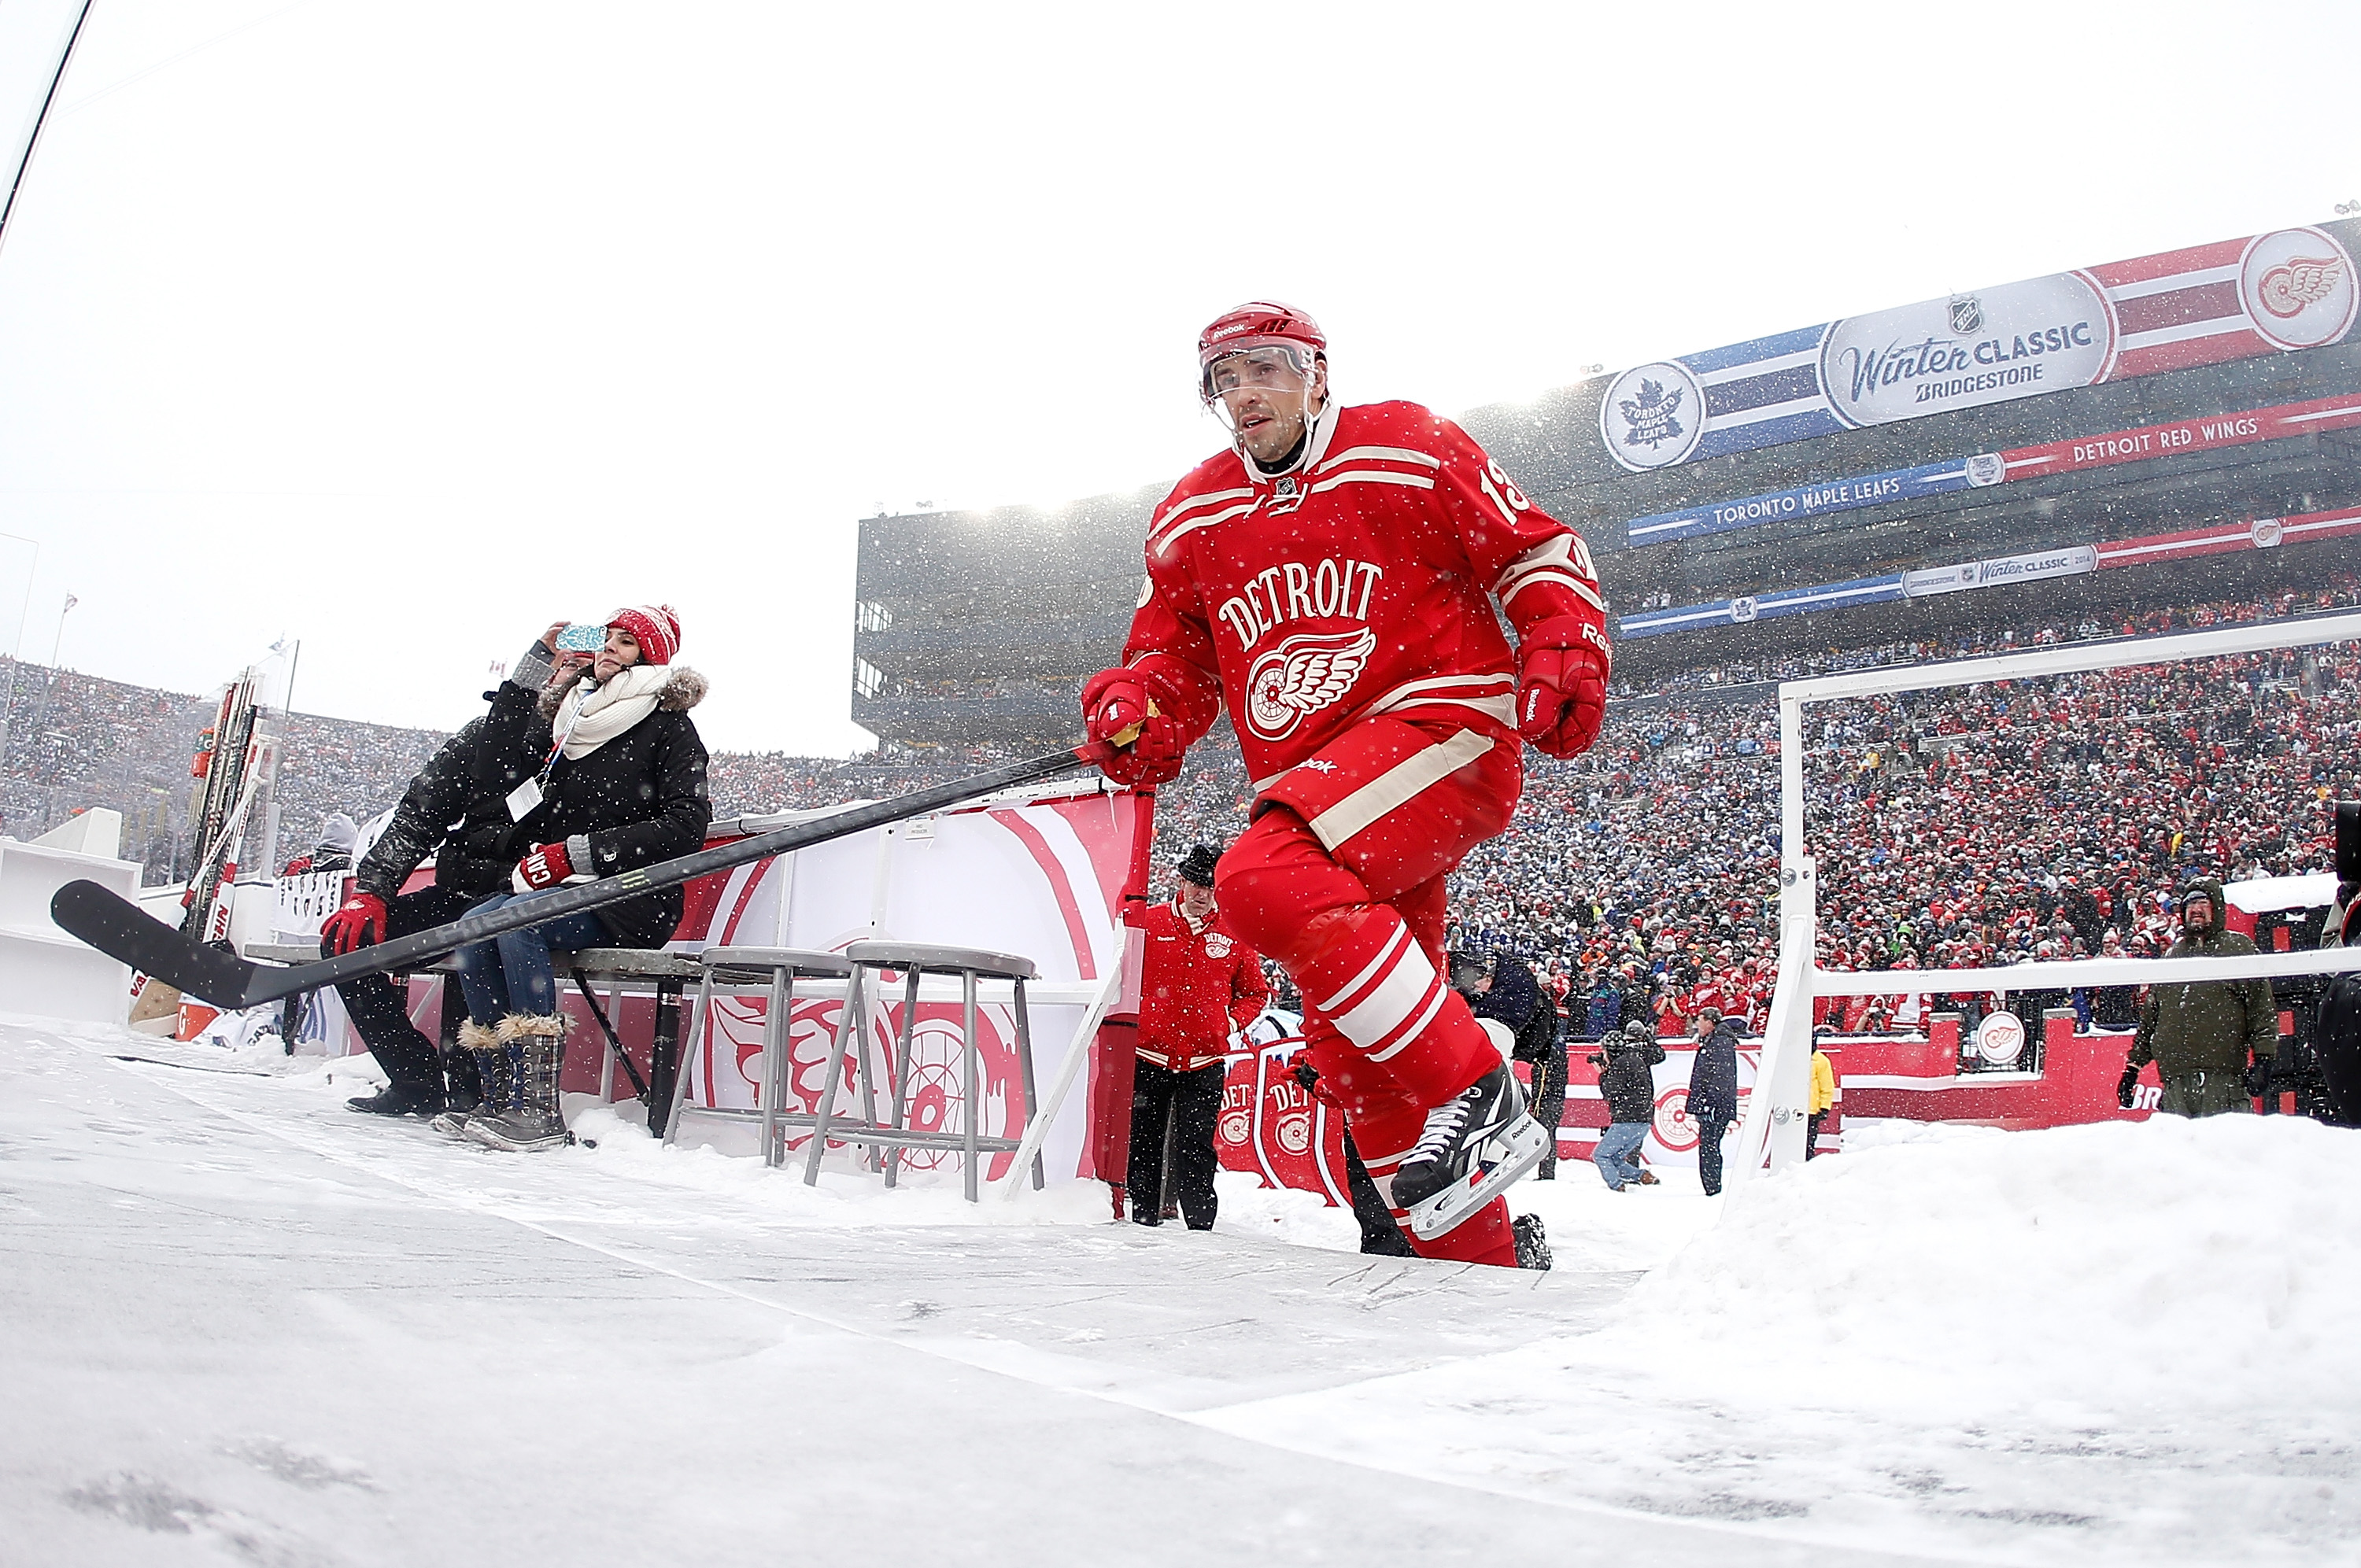 ANN ARBOR, MI - JANUARY 01: Pavel Datsyuk #13 of the Detroit Red Wings takes the ice during the 2014 Bridgestone NHL Winter Classic at Michigan Stadium on January 1, 2014 in Ann Arbor, Michigan. Toronto won the game 3-2 in a shootout. (Photo by Gregory Shamus/Getty Images) 